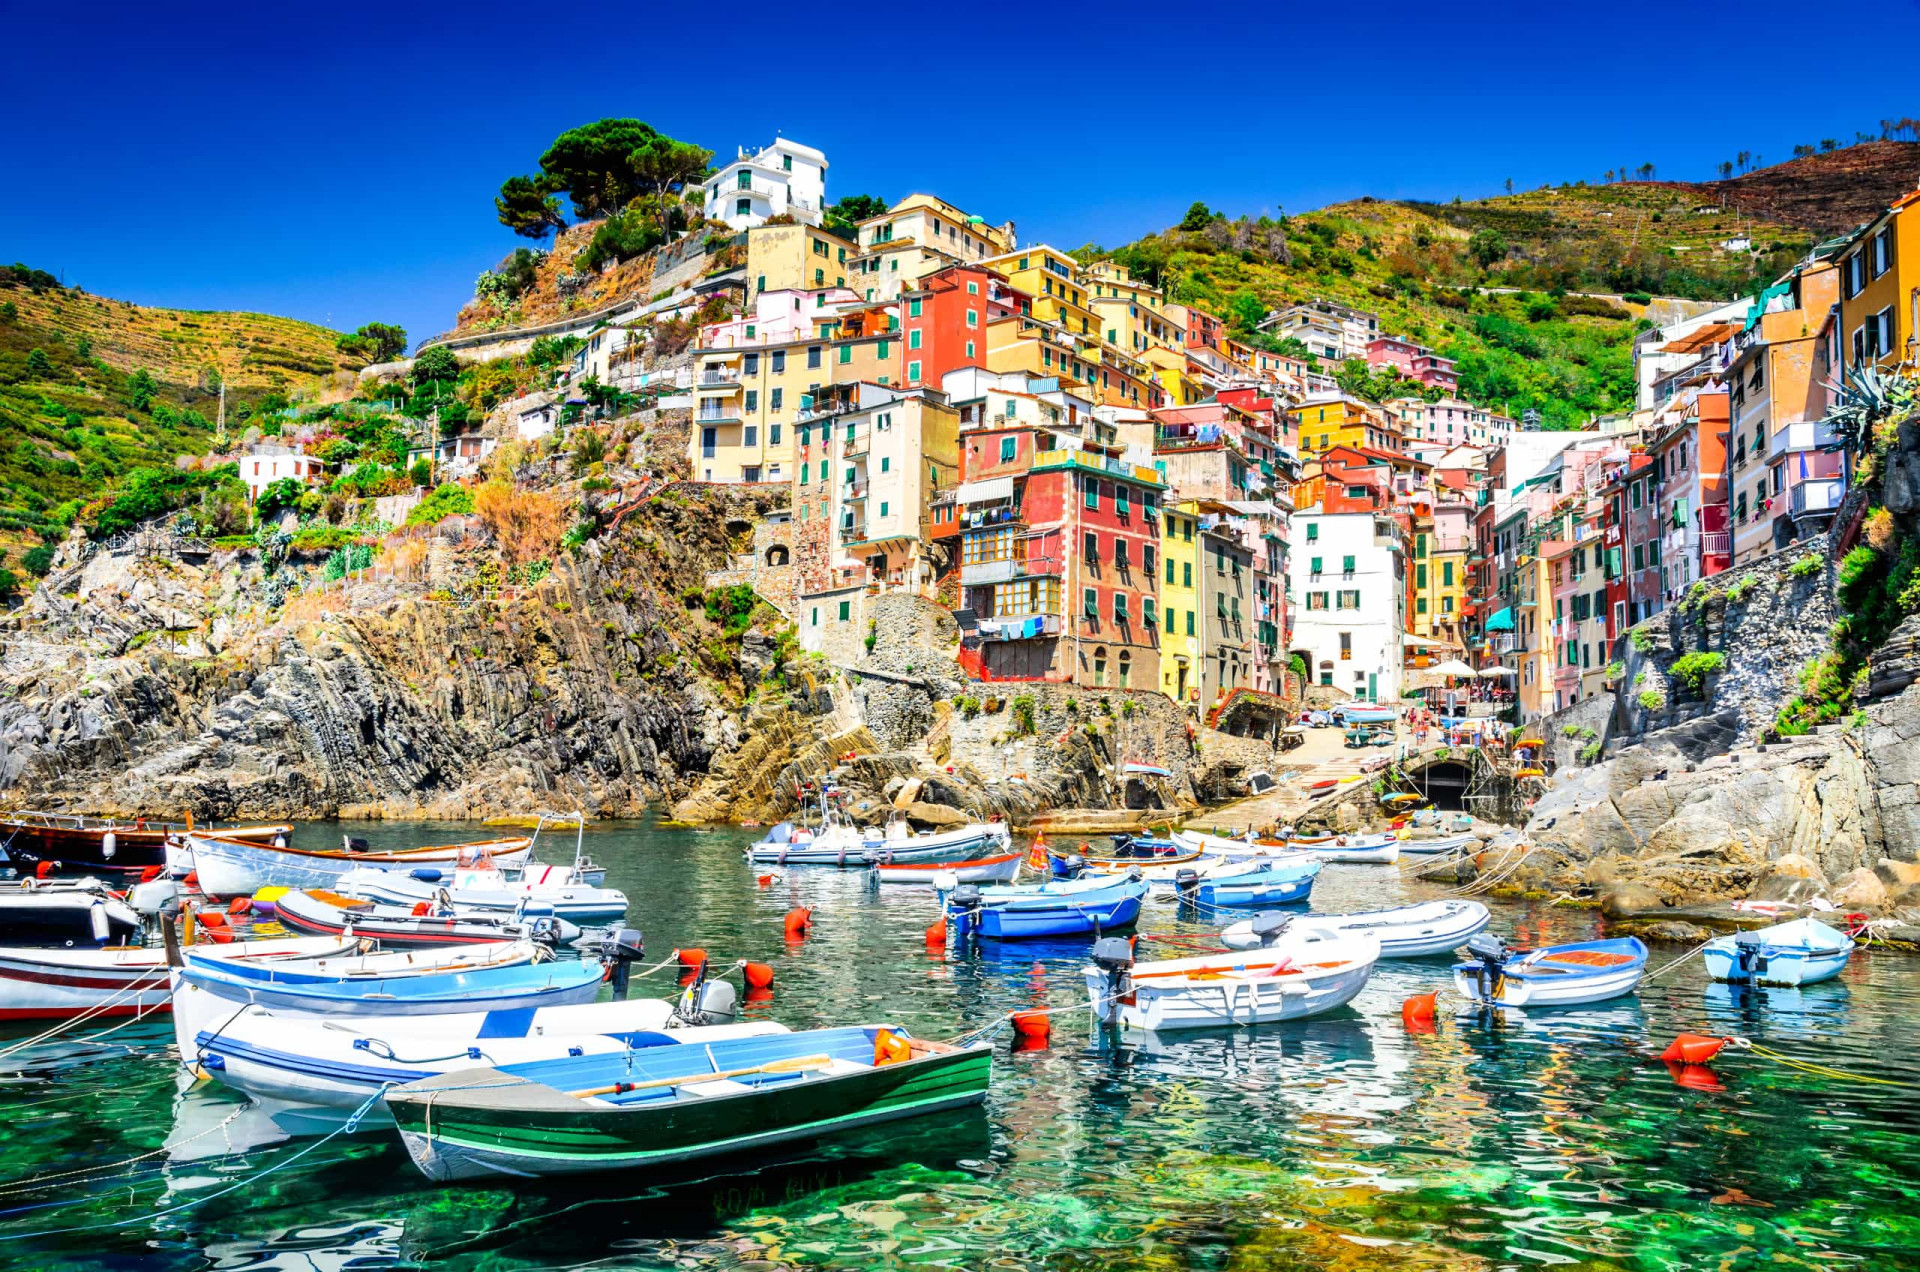 <p>The first of the Cinque Terre, or five towns, one meets when traveling north from La Spezia, Riomaggiore dates back to the 8th century and is characterized by typical stone houses with colored facades and slate-roofs.</p>